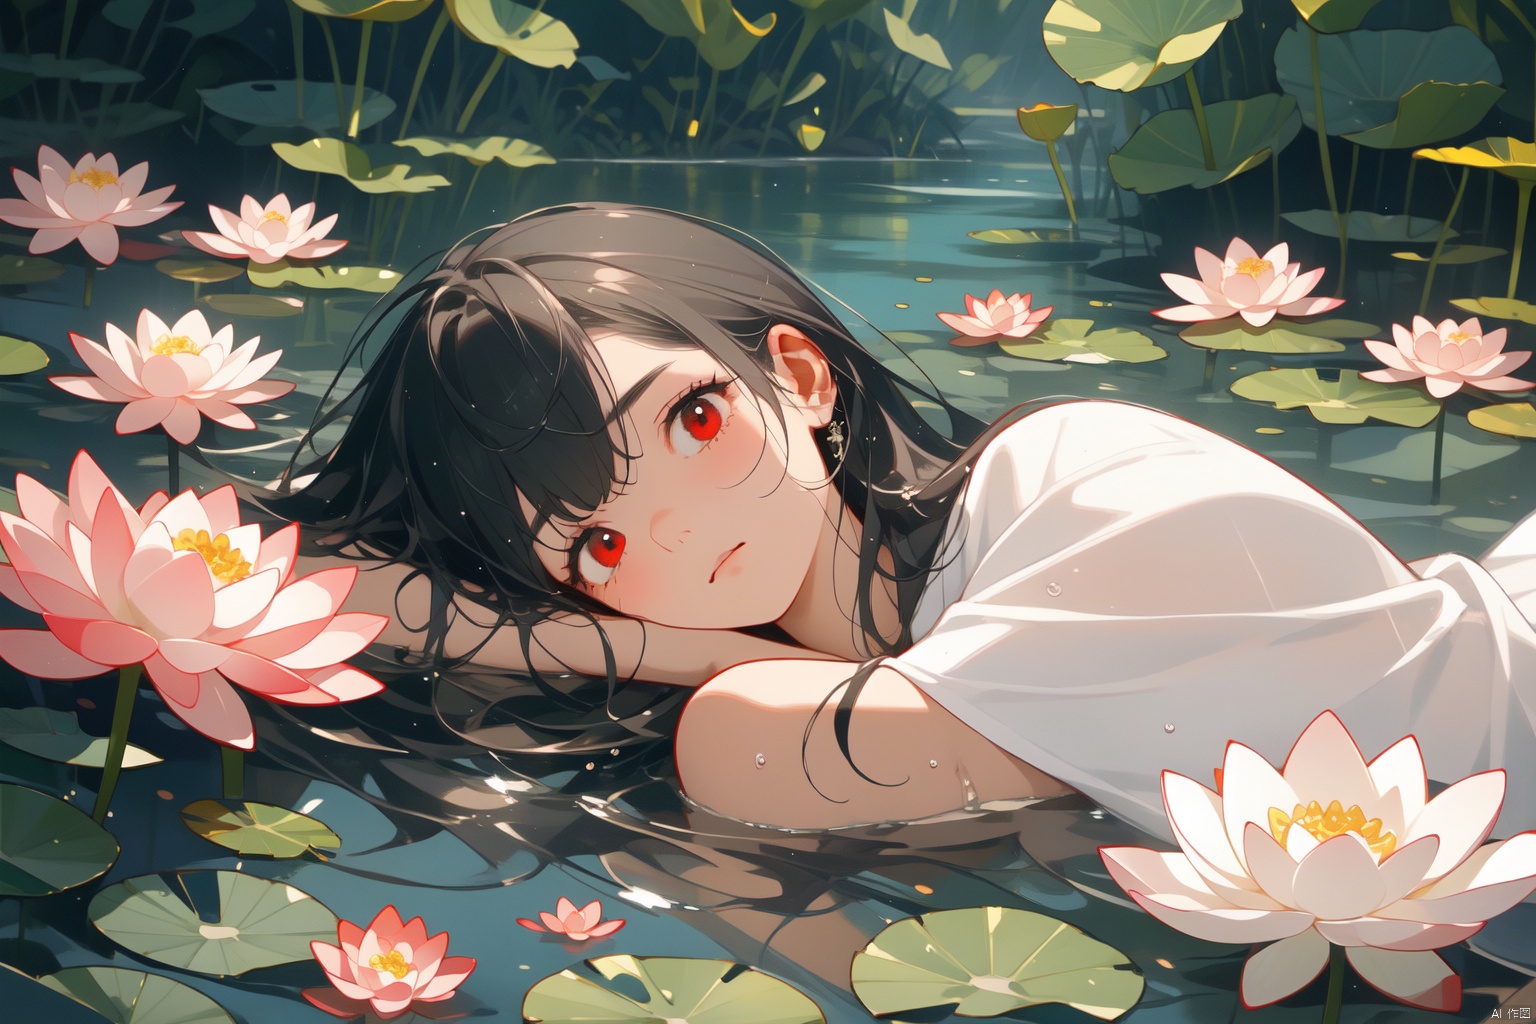 Taoist, lying on a river of blood, holding lotus flowers in his hand. The lotus flowers are stacked on top of him, creating a dark atmosphere. A girl with black hair and red eyes is lying in the water, creating a dark, evil, and gloomy atmosphere. Dark tone,lying,lying in the water,
仰躺supine

